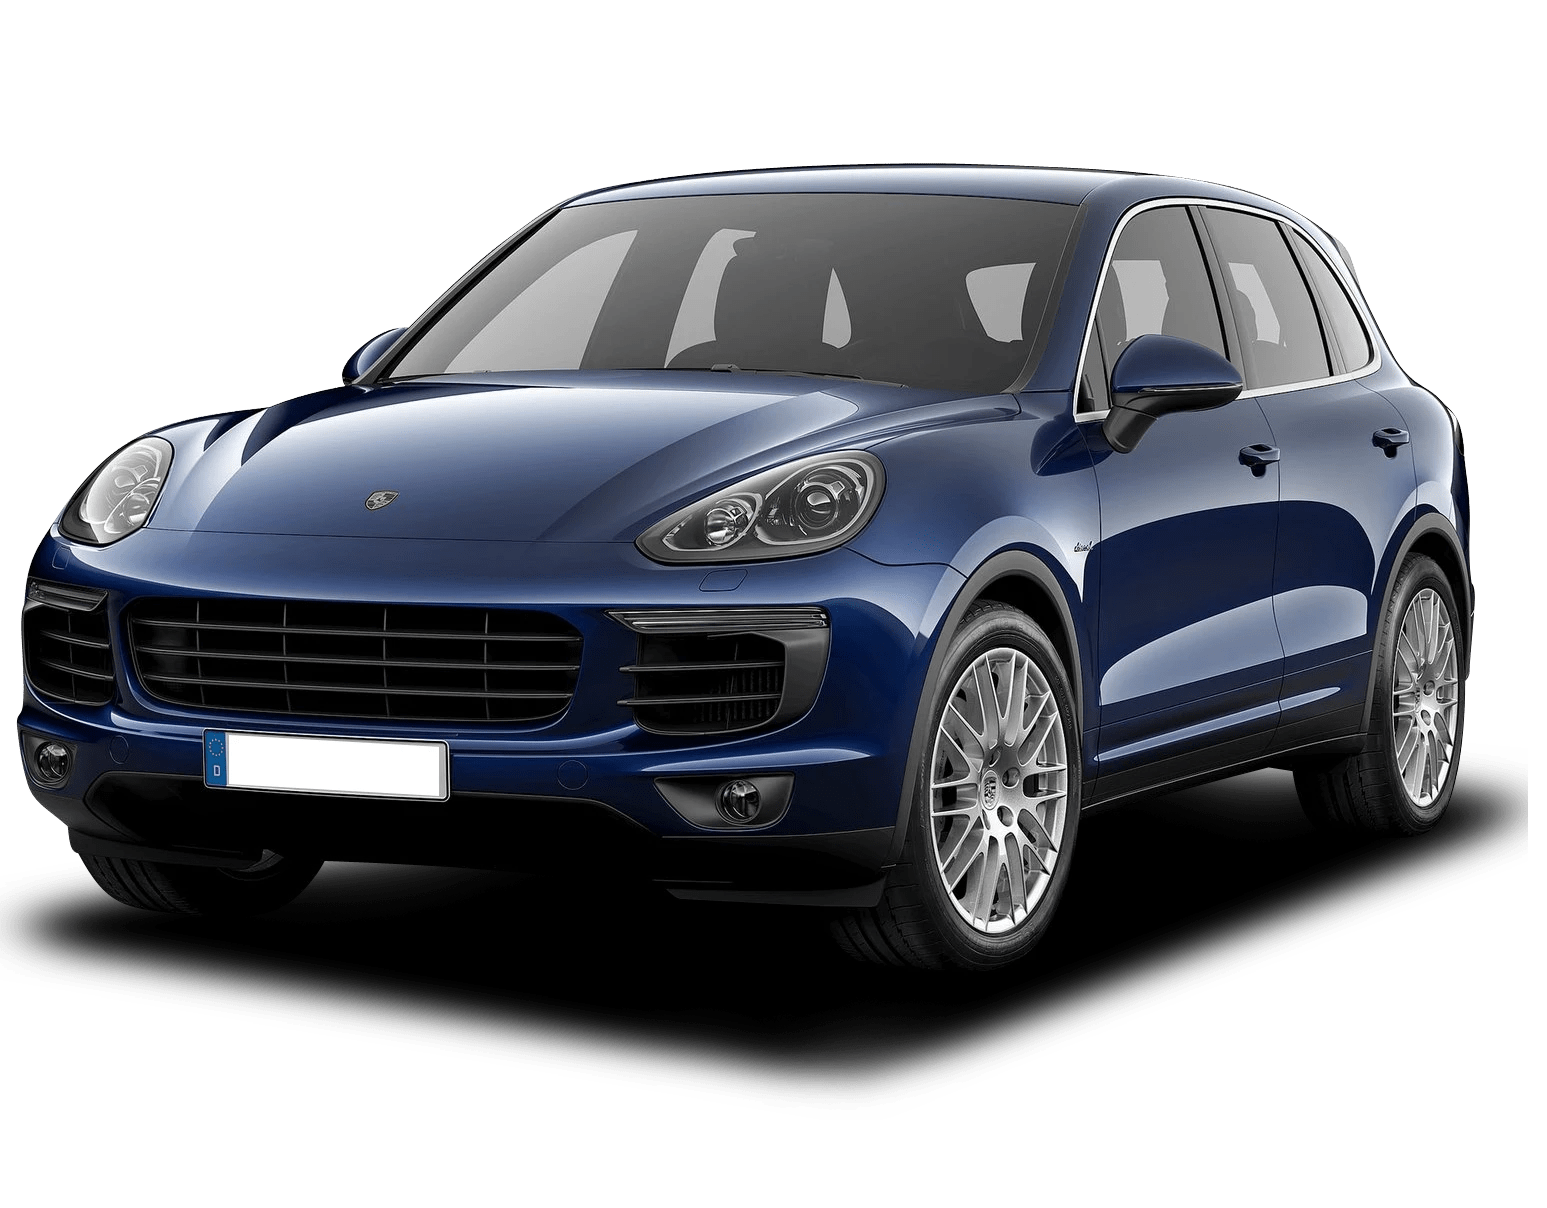 The price of cayenne petrol top . Porsche Cayenne Review For Sale Colours Interior Specs News Carsguide